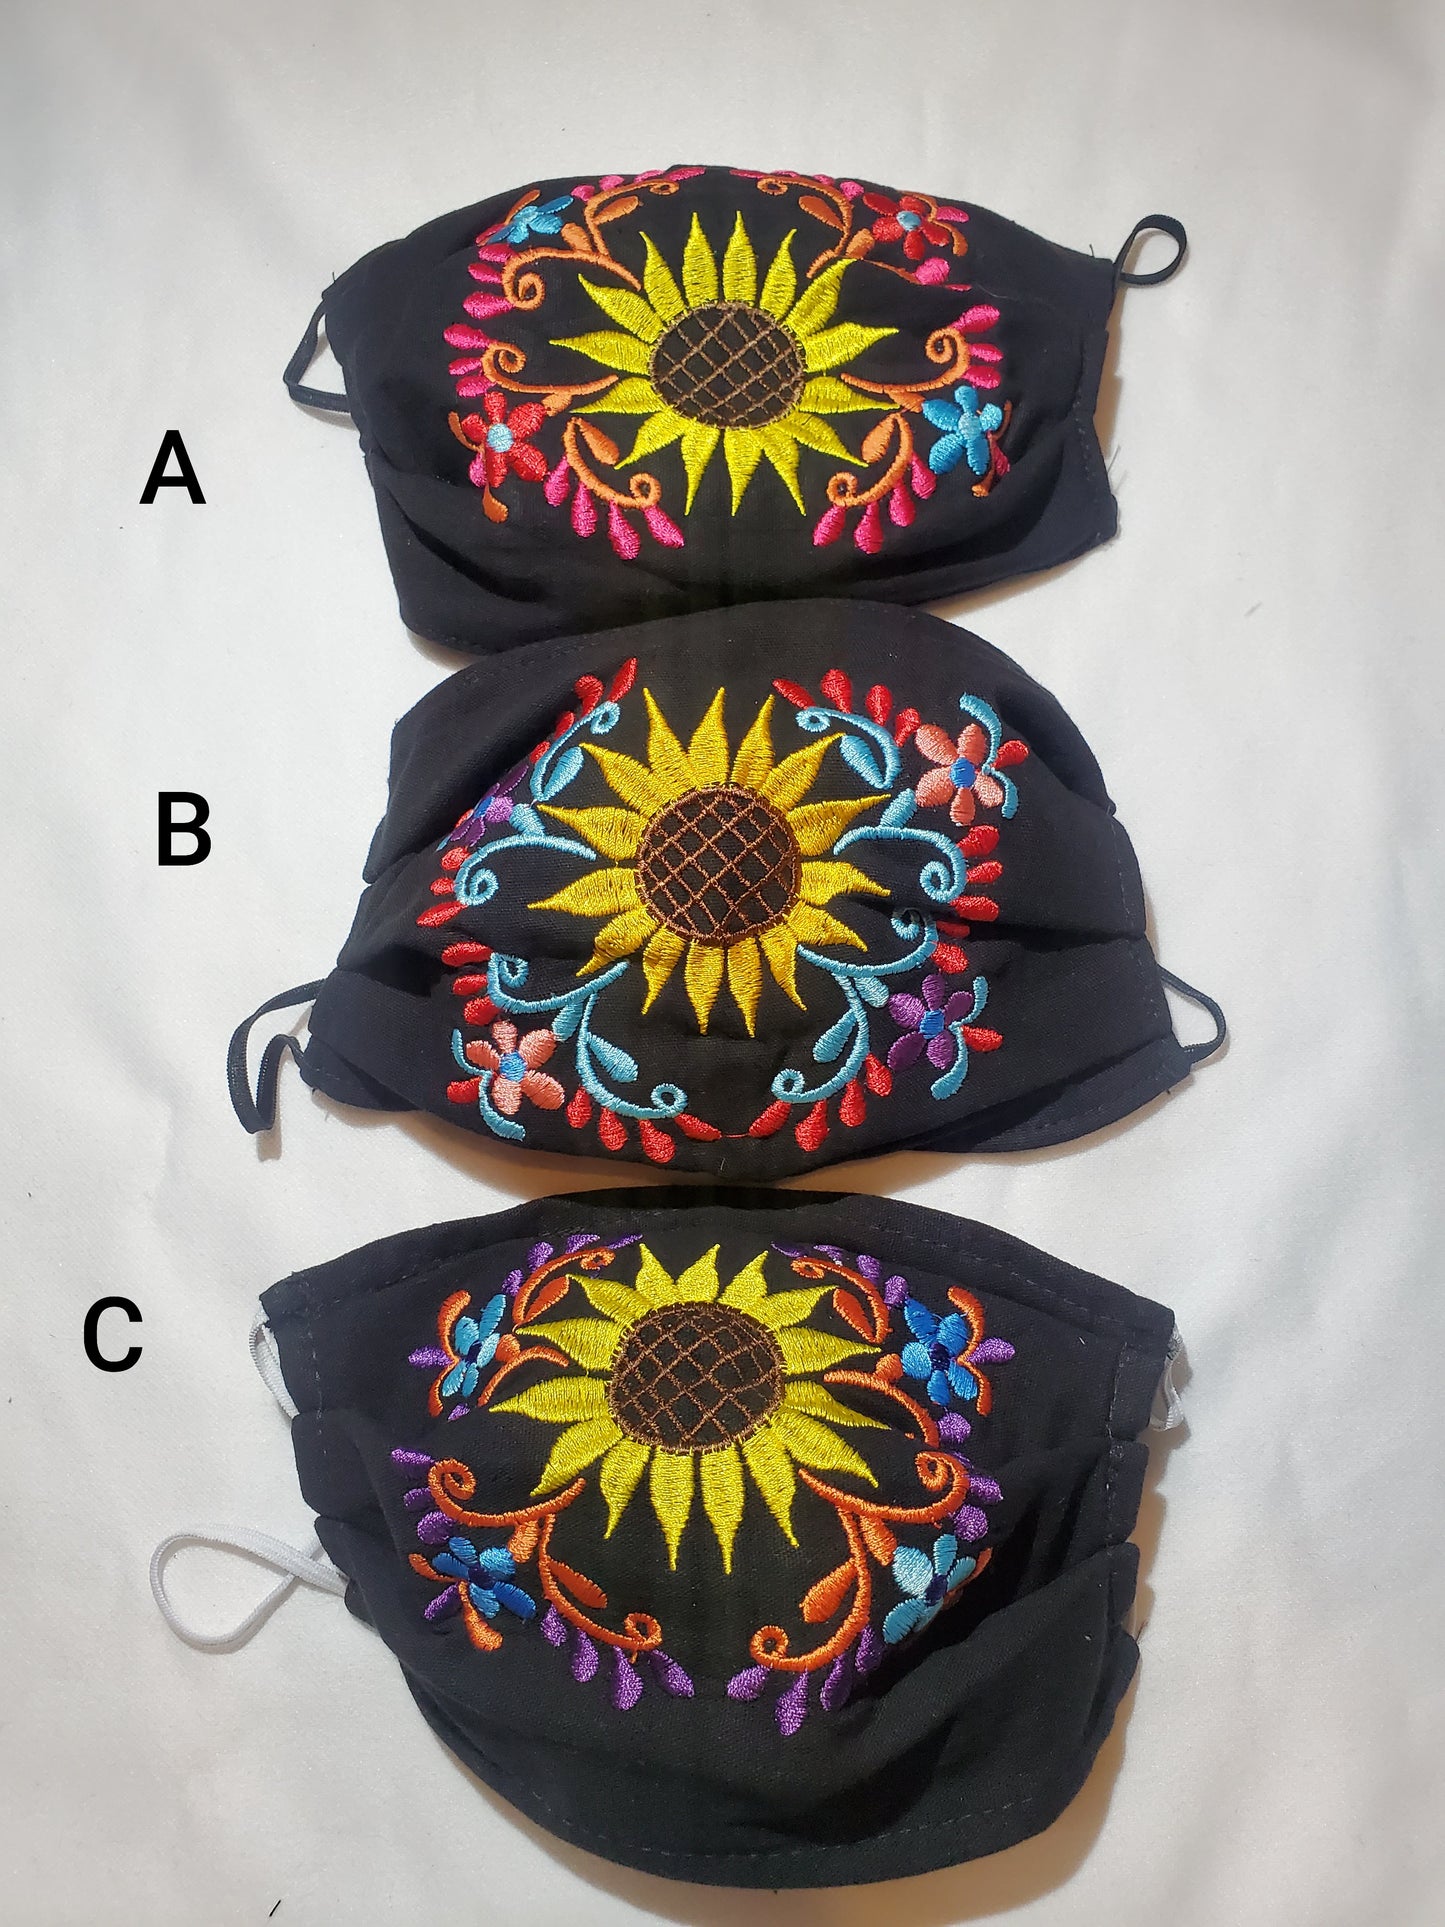 Sunflowers embroided face masks